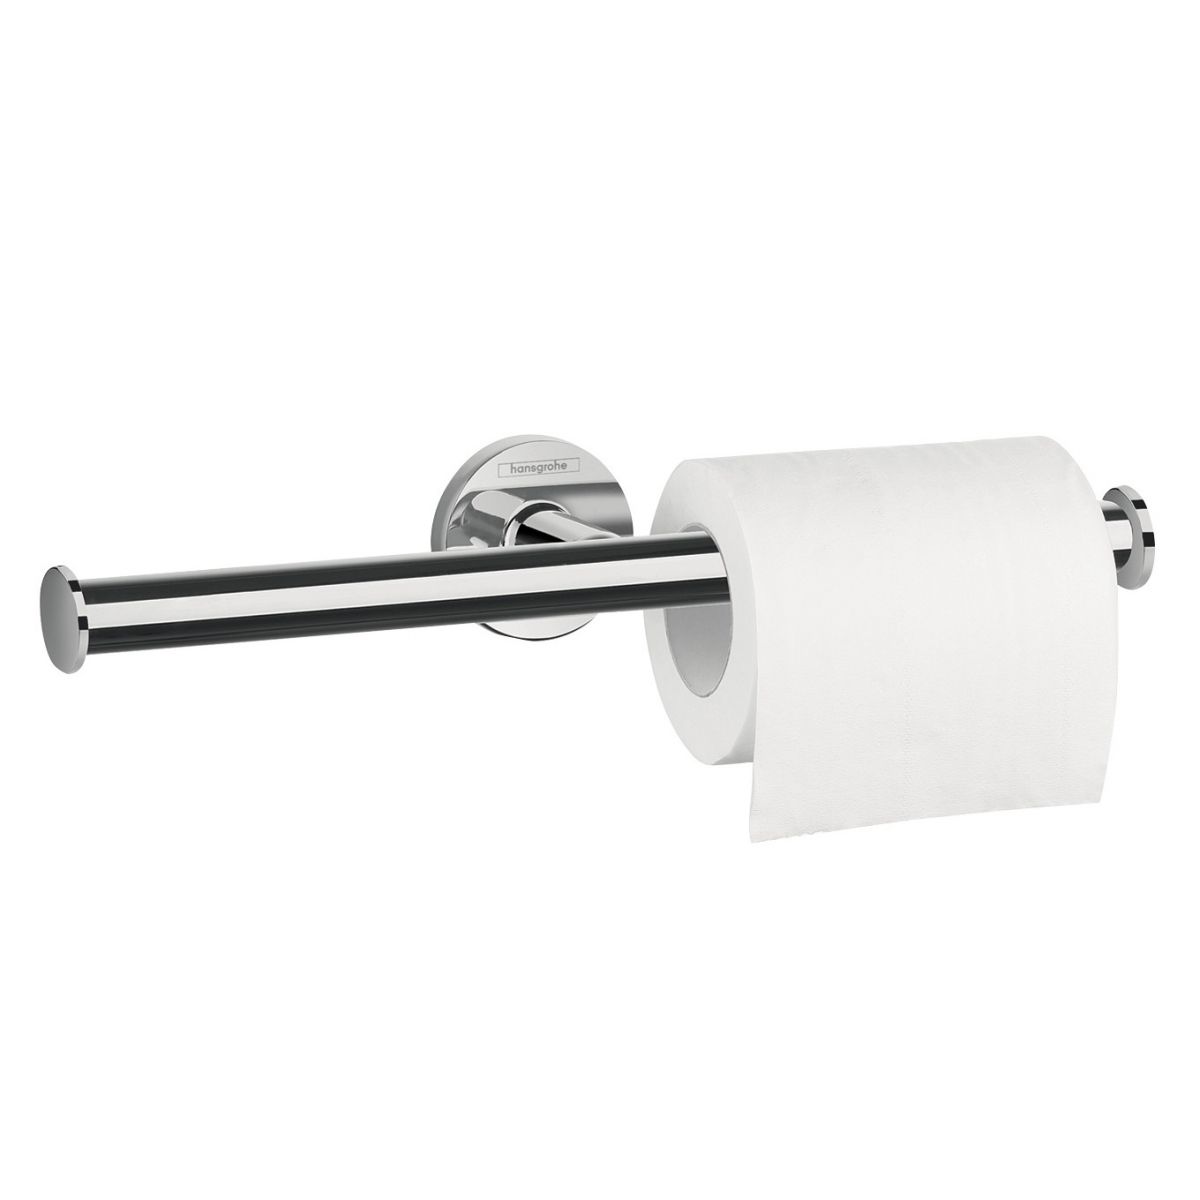 Hansgrohe Logis Universal Spare Toilet Roll Holder